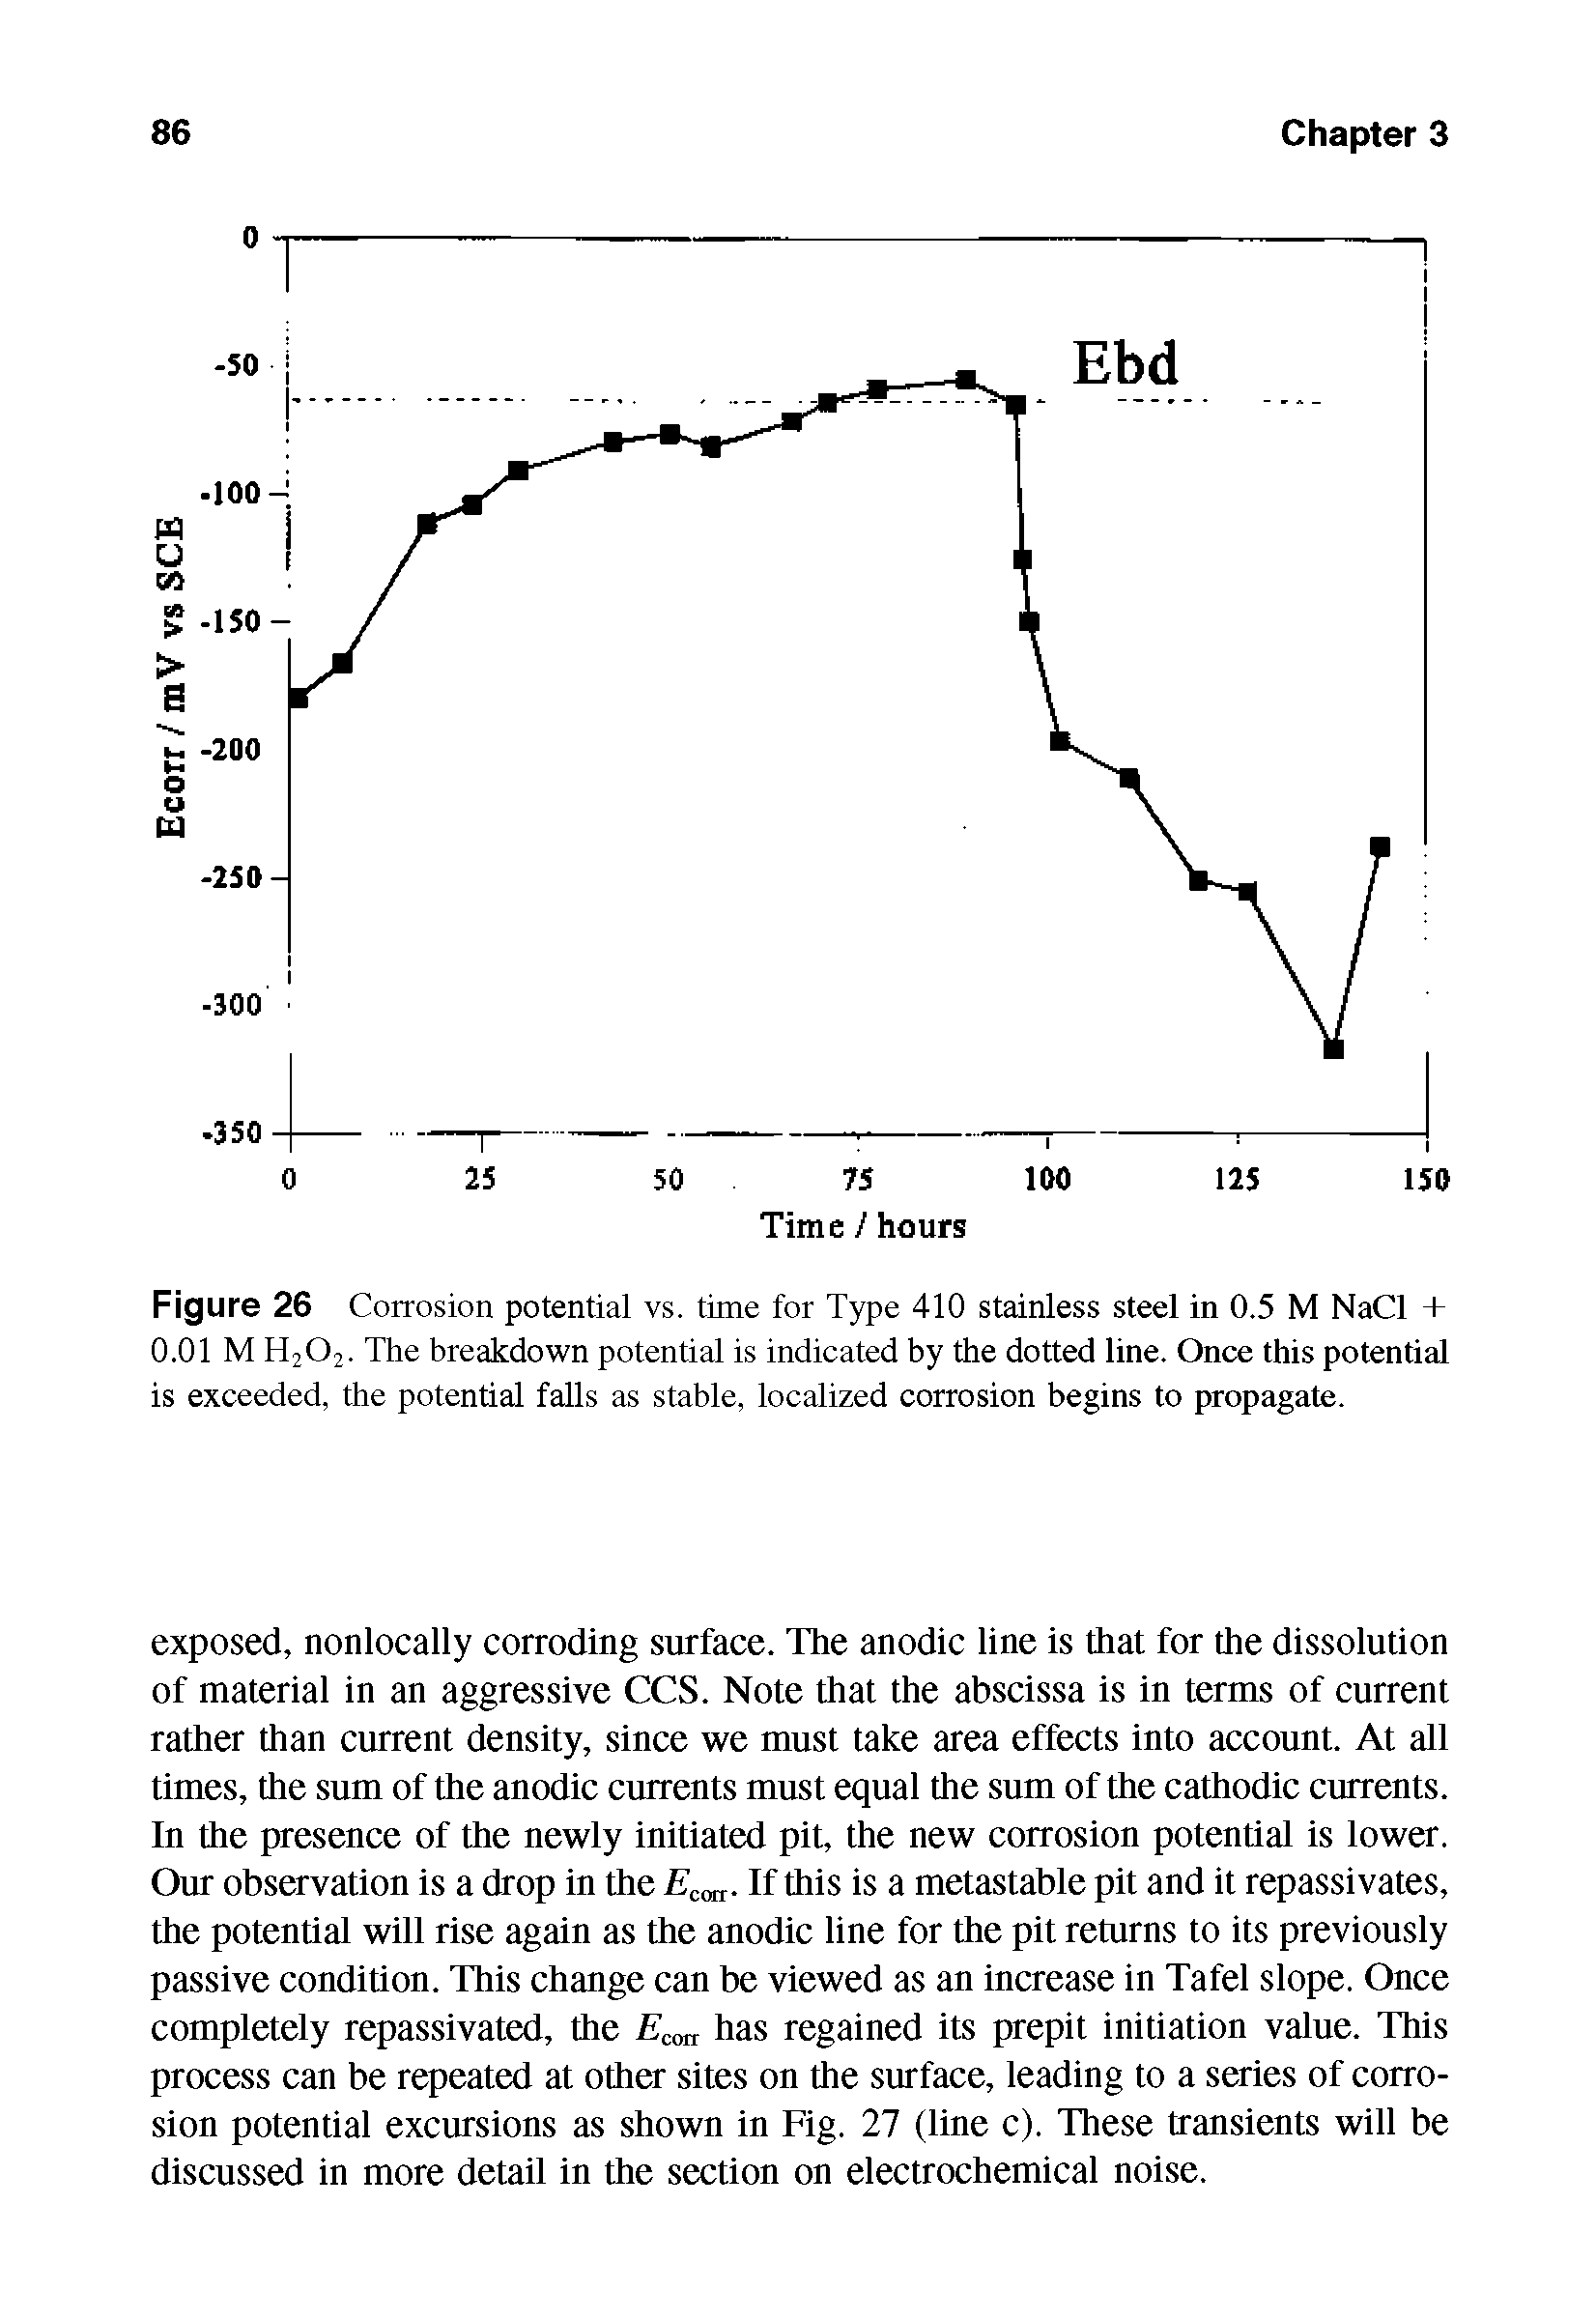 Figure 26 Corrosion potential vs. time for Type 410 stainless steel in 0.5 M NaCl + 0.01 M H202. The breakdown potential is indicated by the dotted line. Once this potential is exceeded, the potential falls as stable, localized corrosion begins to propagate.